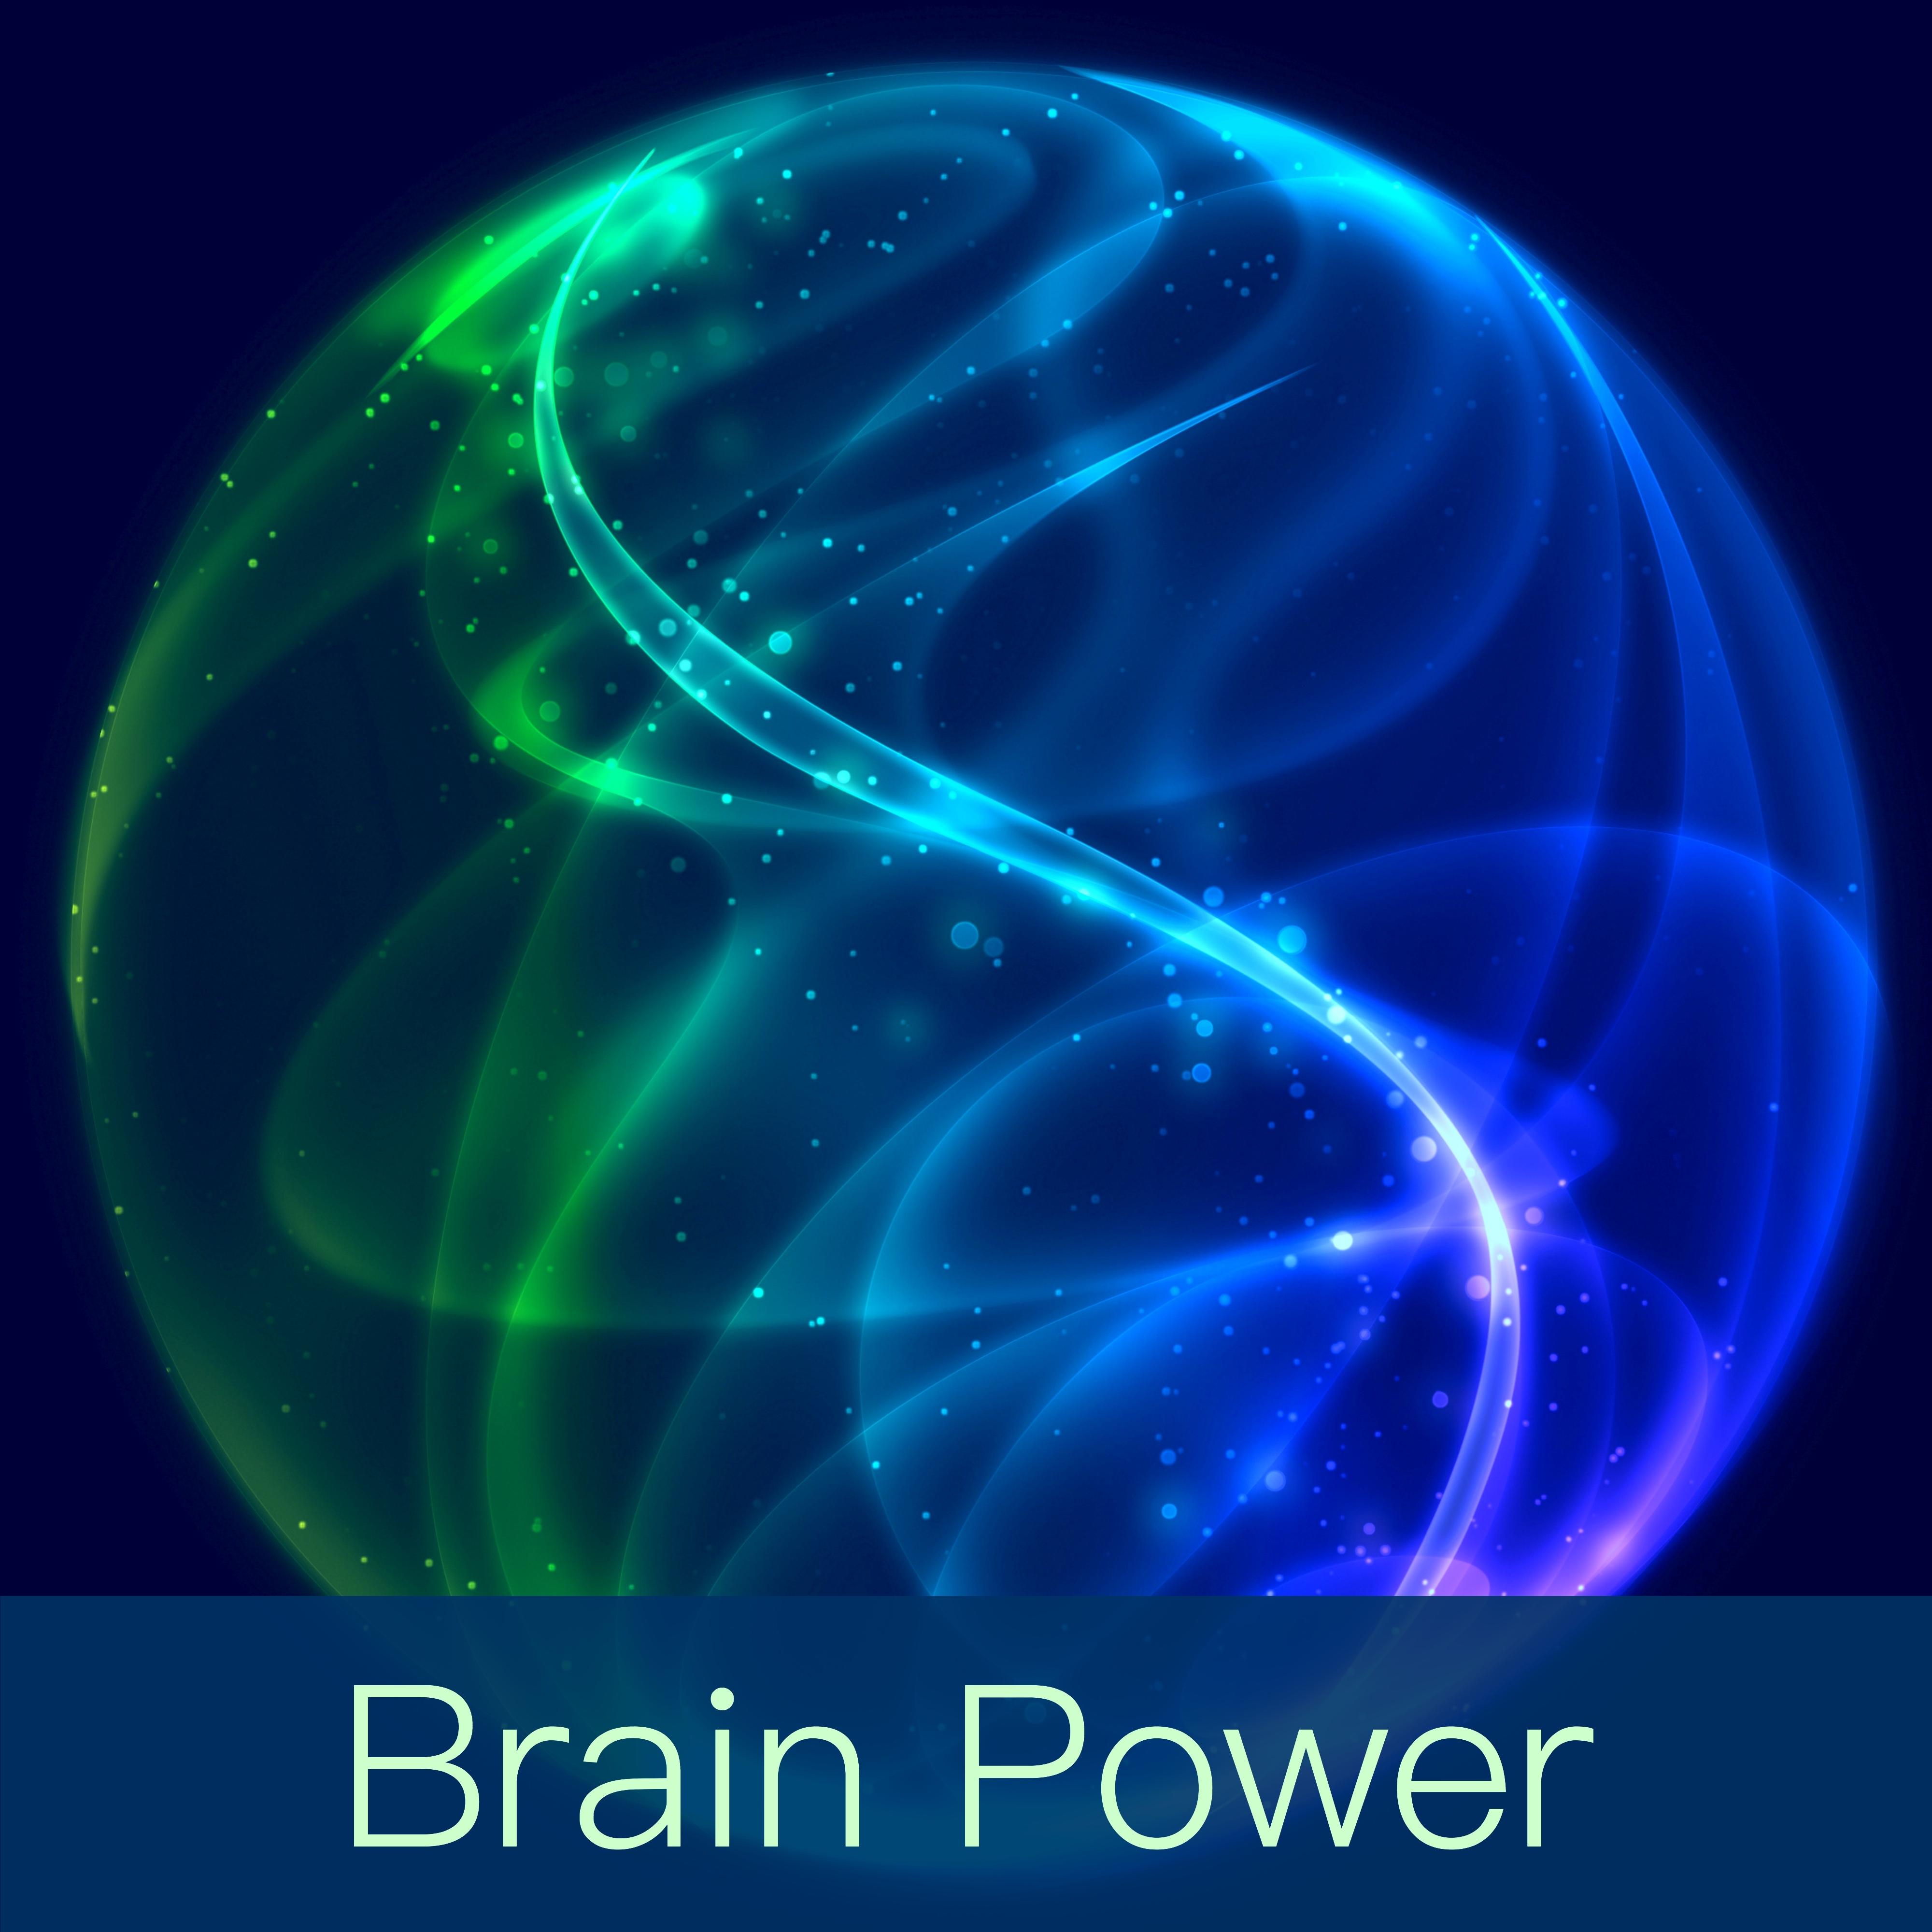 Brain Power - Relaxing Flute & Waves Music Sound Therapy for Exam Study Classical Music to Increase Brain Power, Classical Study Music for Relaxation, Concentration and Focus on Learning